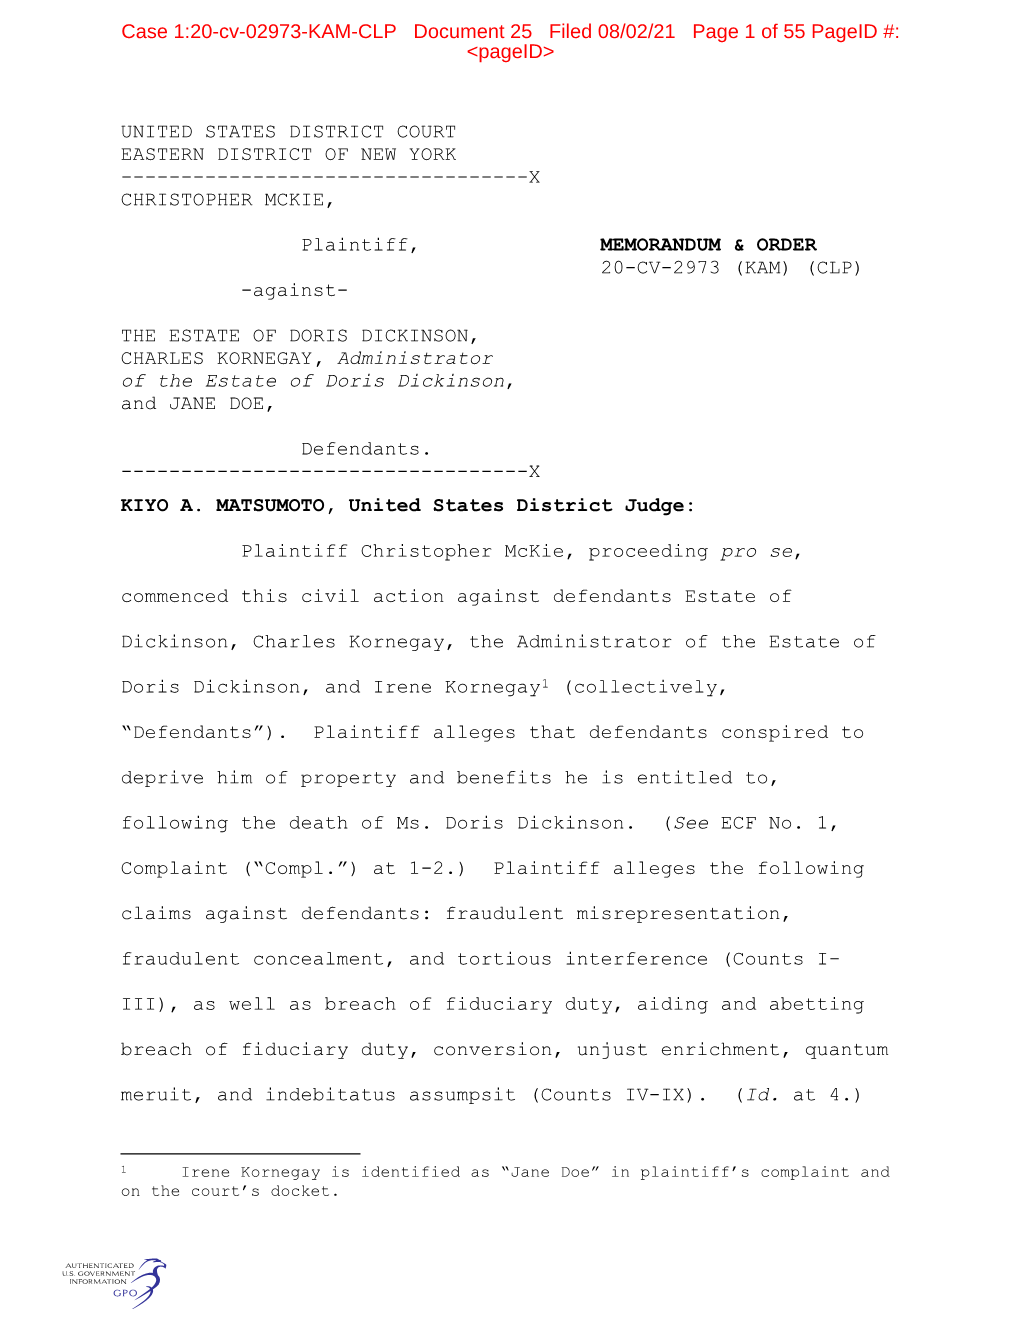 Case 1:20-Cv-02973-KAM-CLP Document 25 Filed 08/02/21 Page